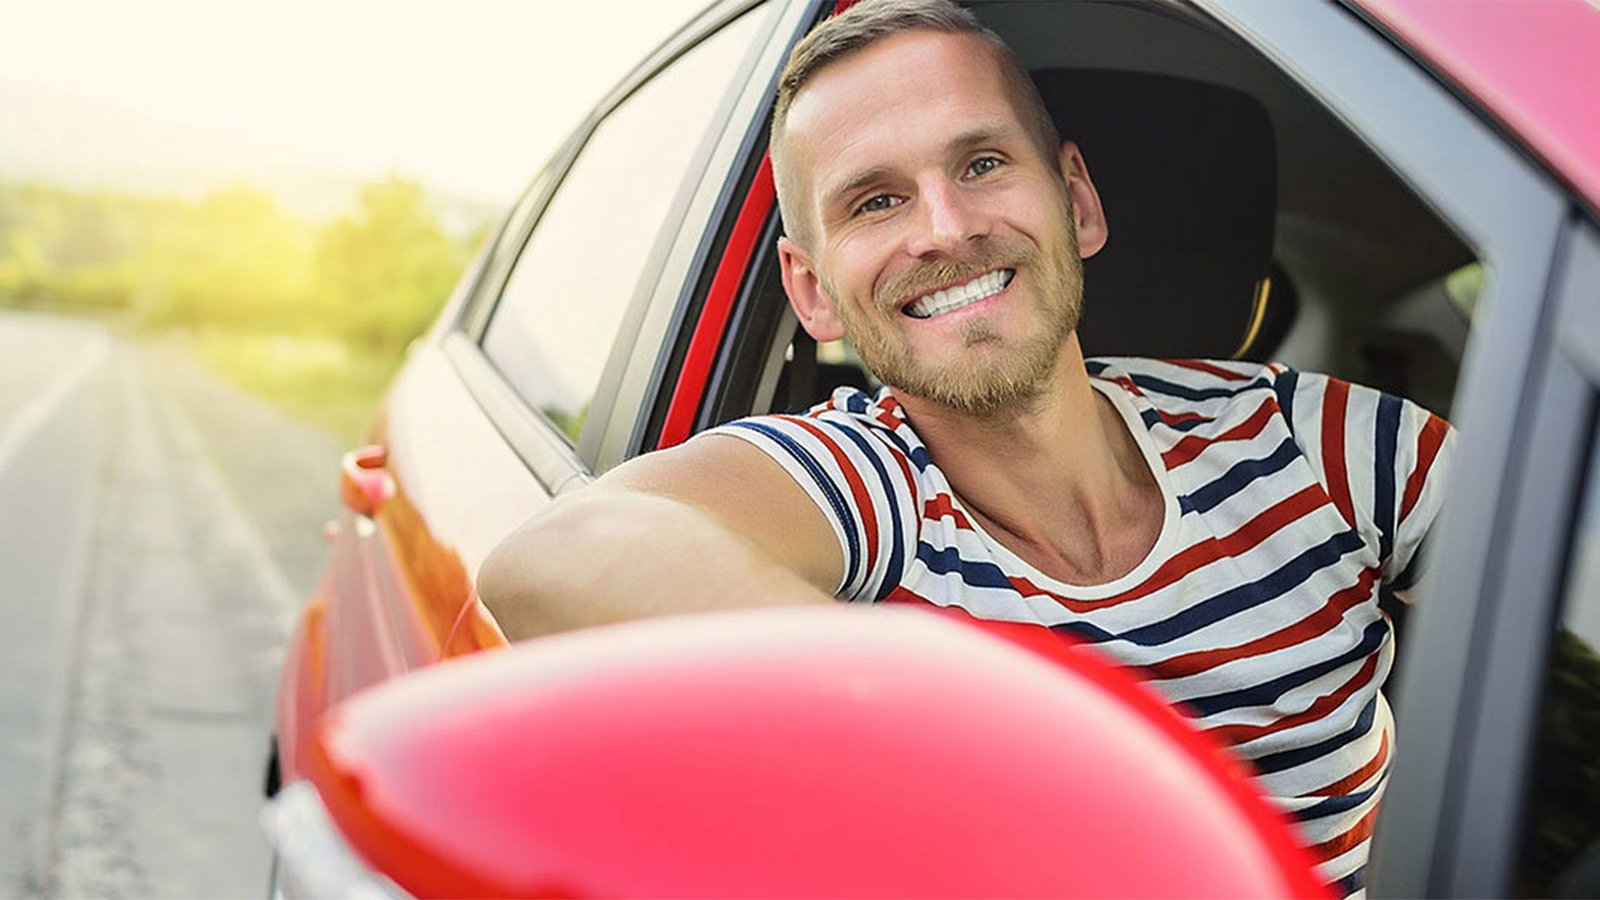 Man sitting in the drivers seat of a red car and smiling out the window.